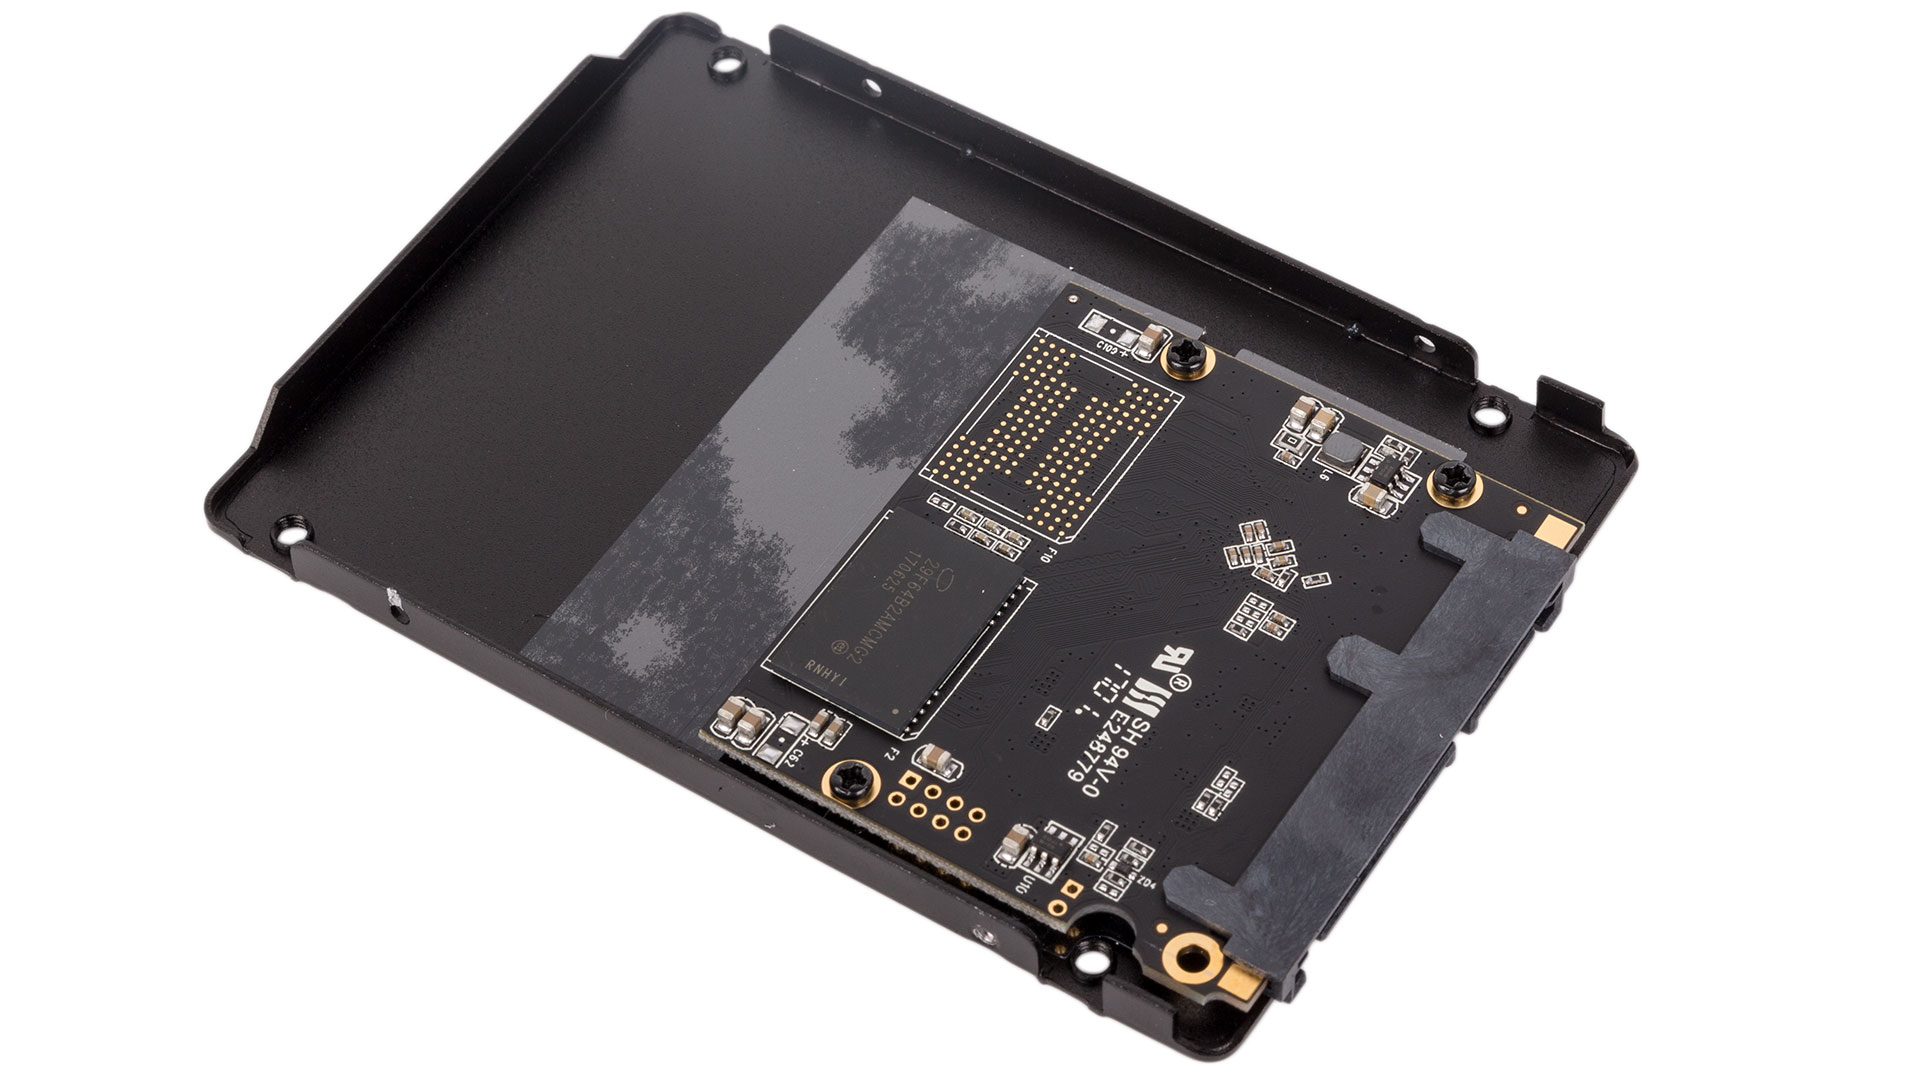 Silicon Power Slim S55 Review (240GB)